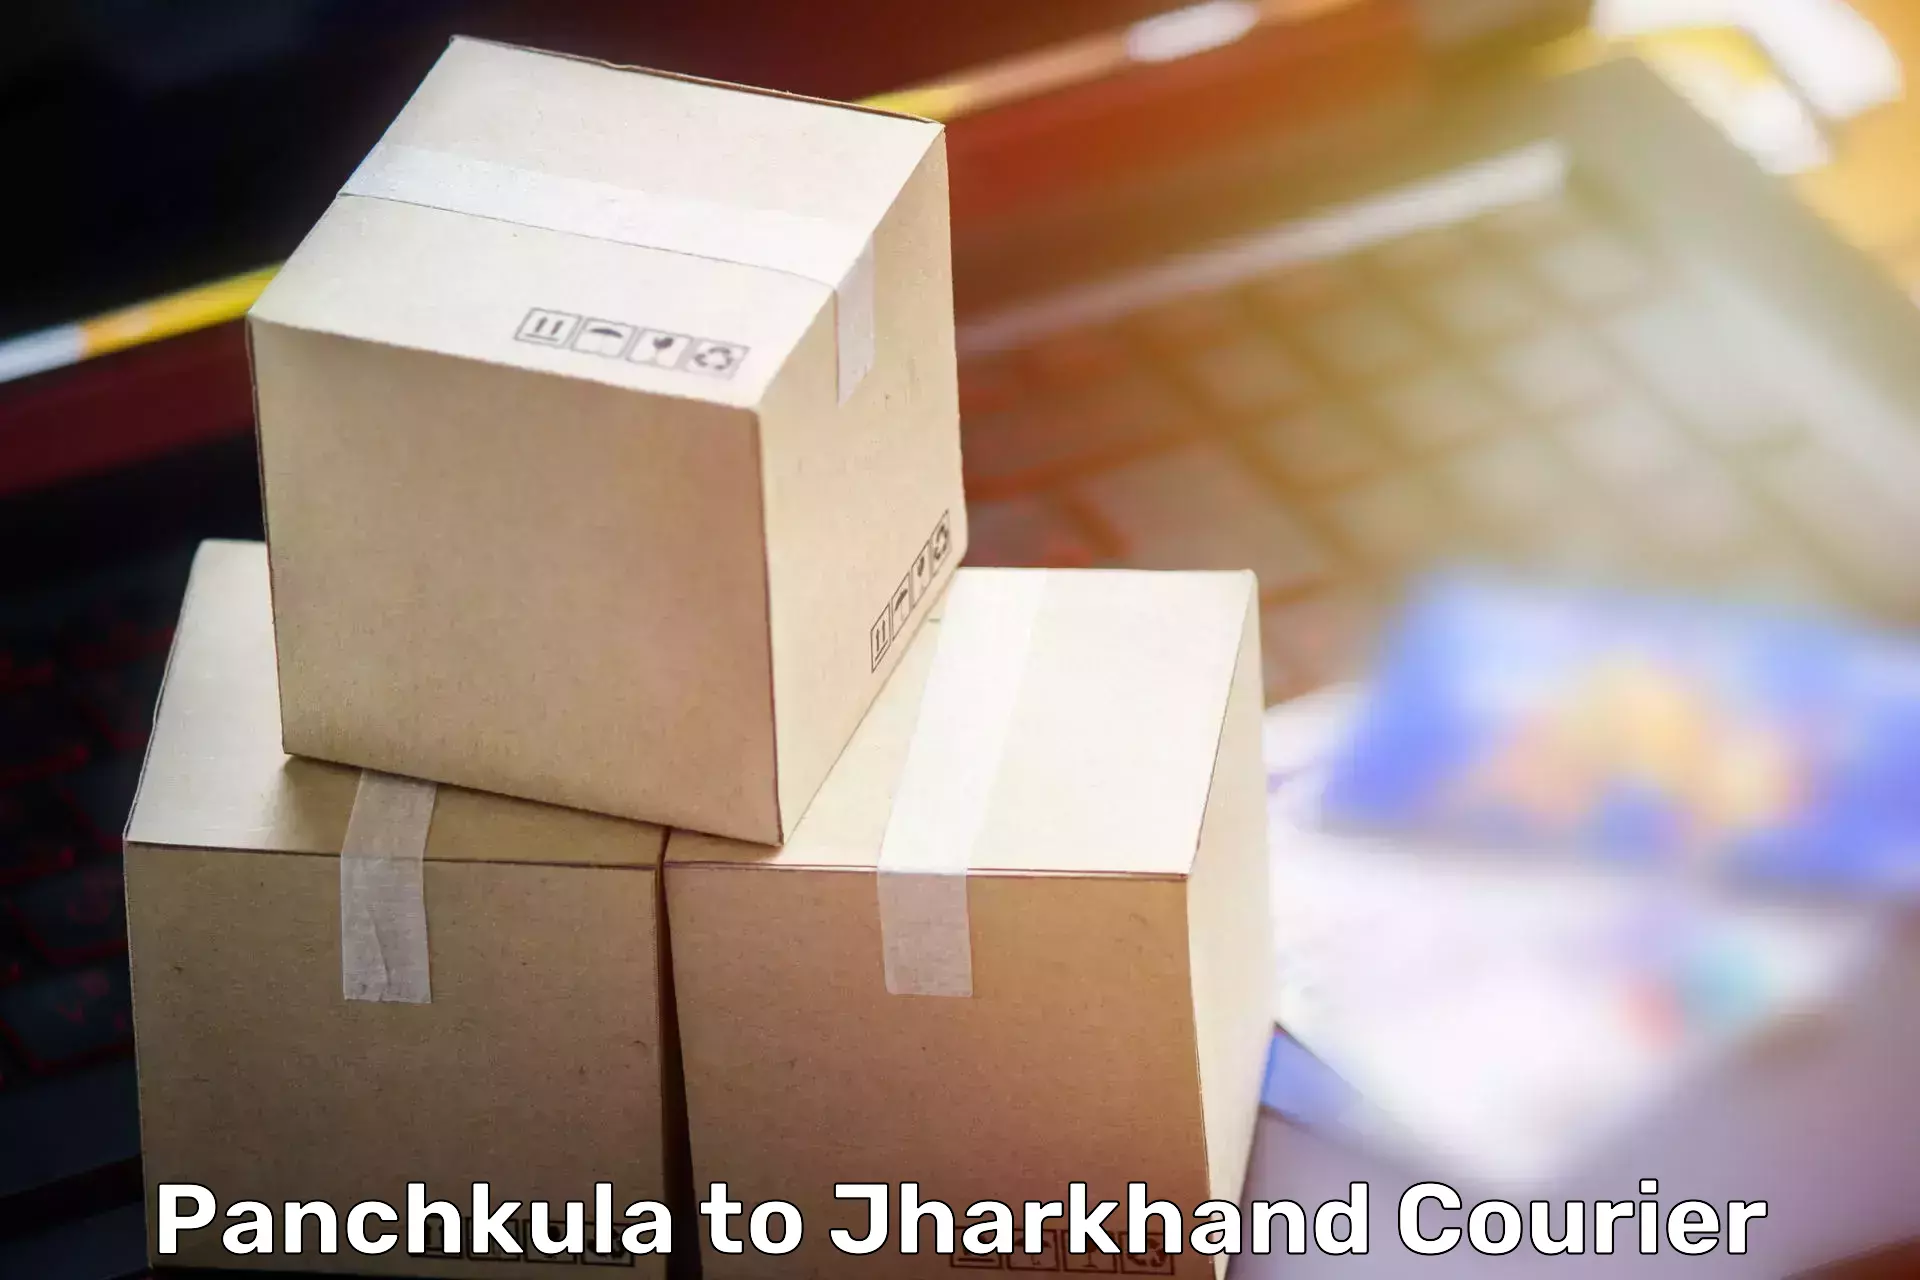 Furniture delivery service Panchkula to IIIT Ranchi